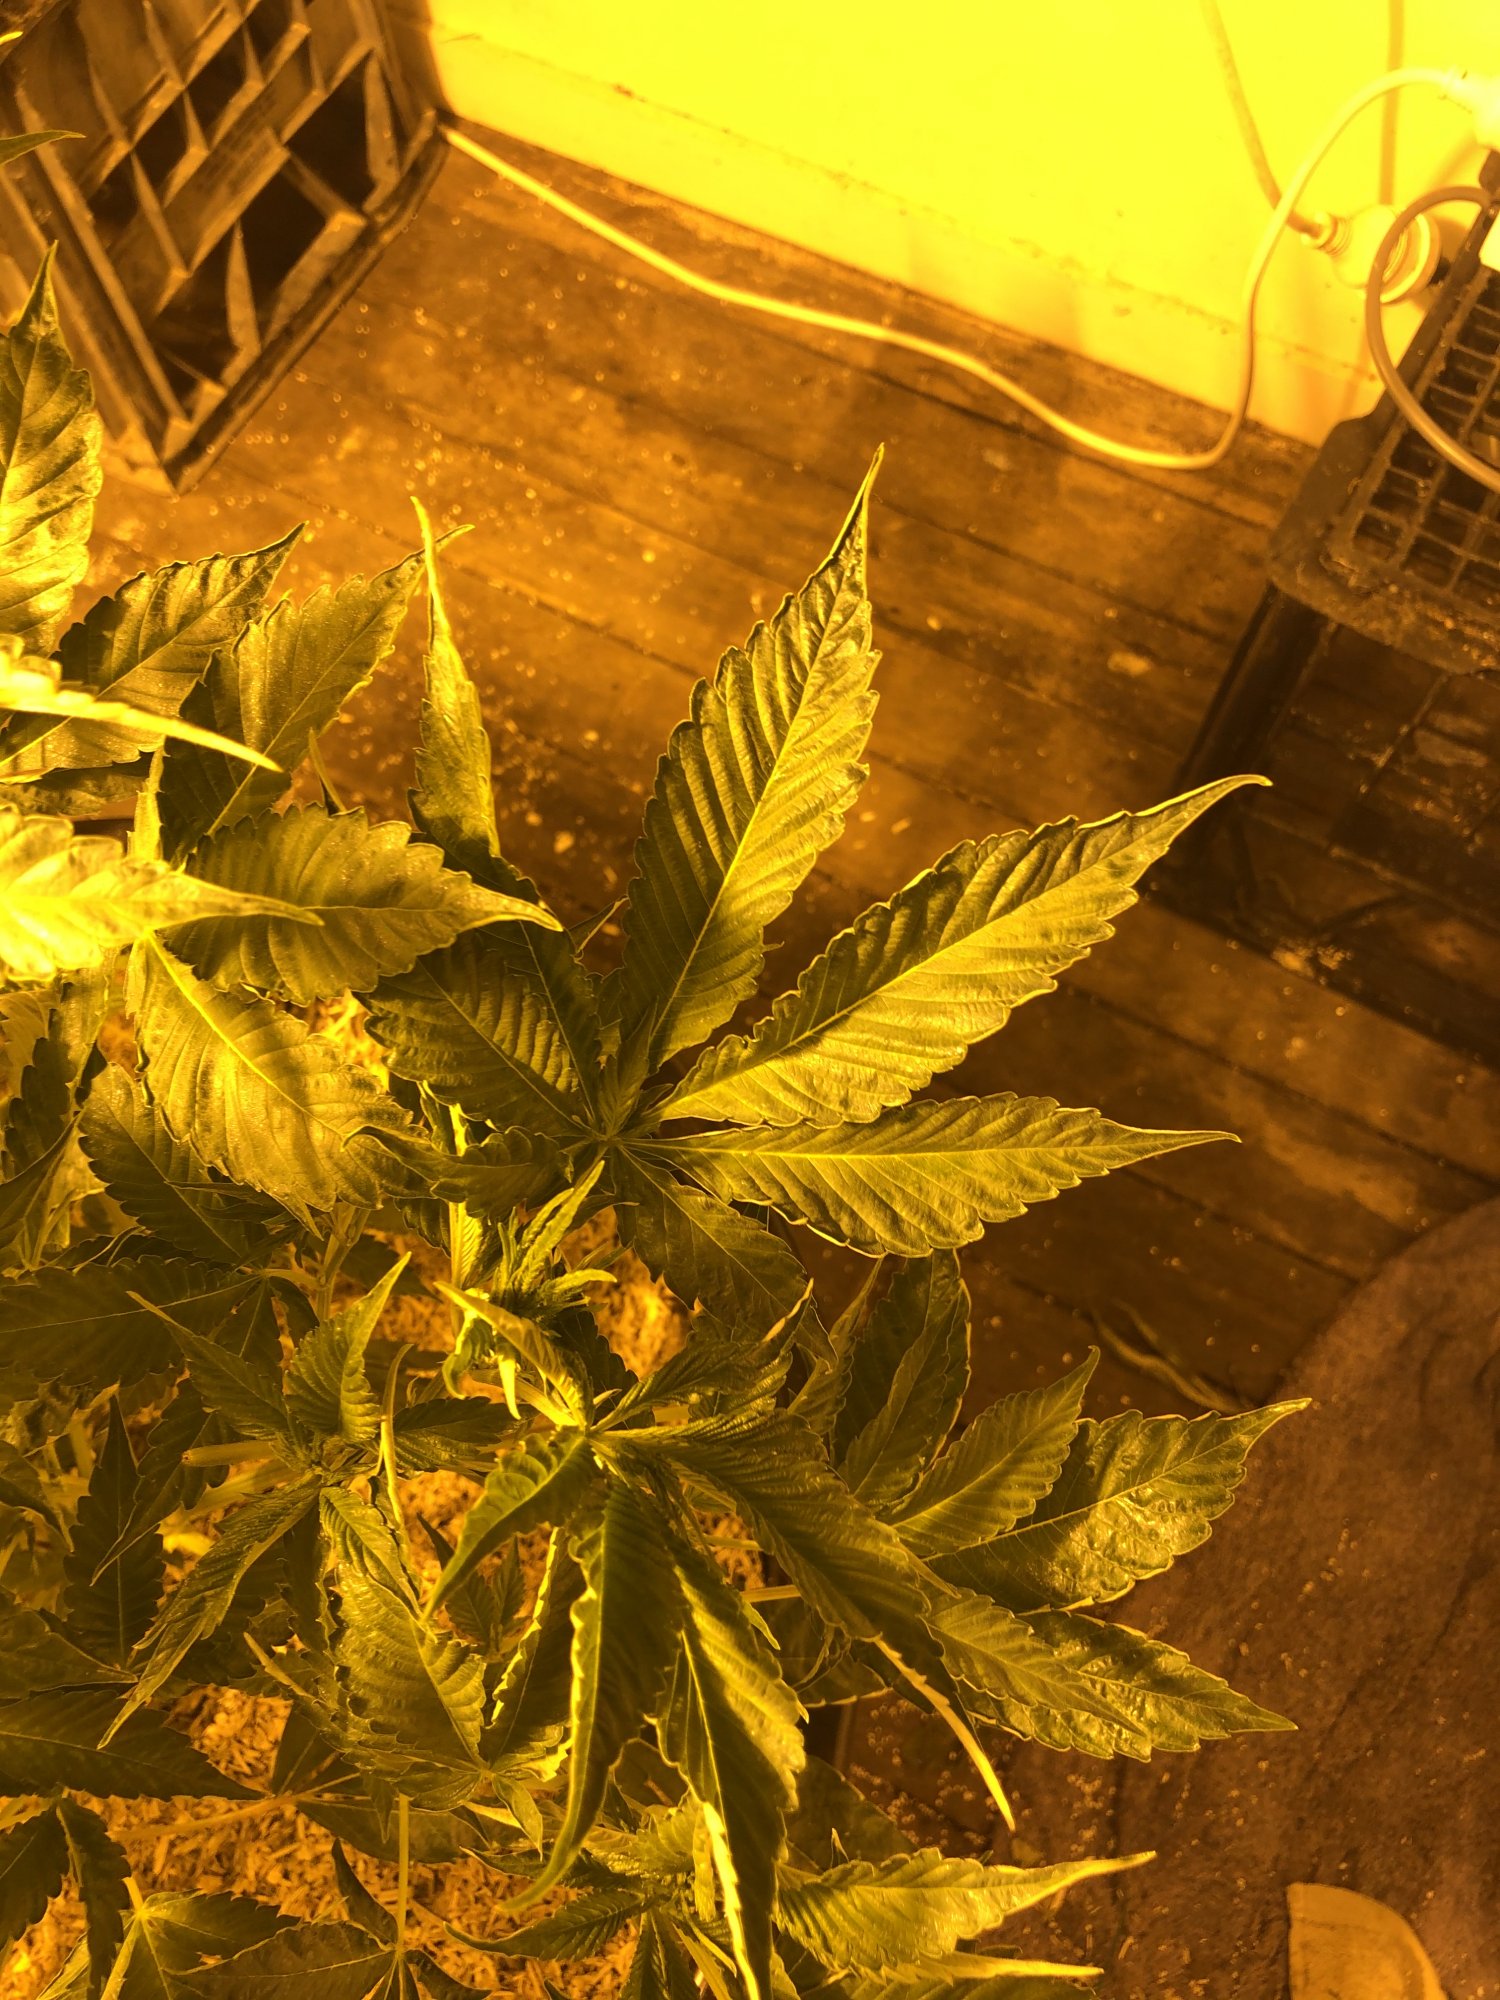 Stem rot or please help 3